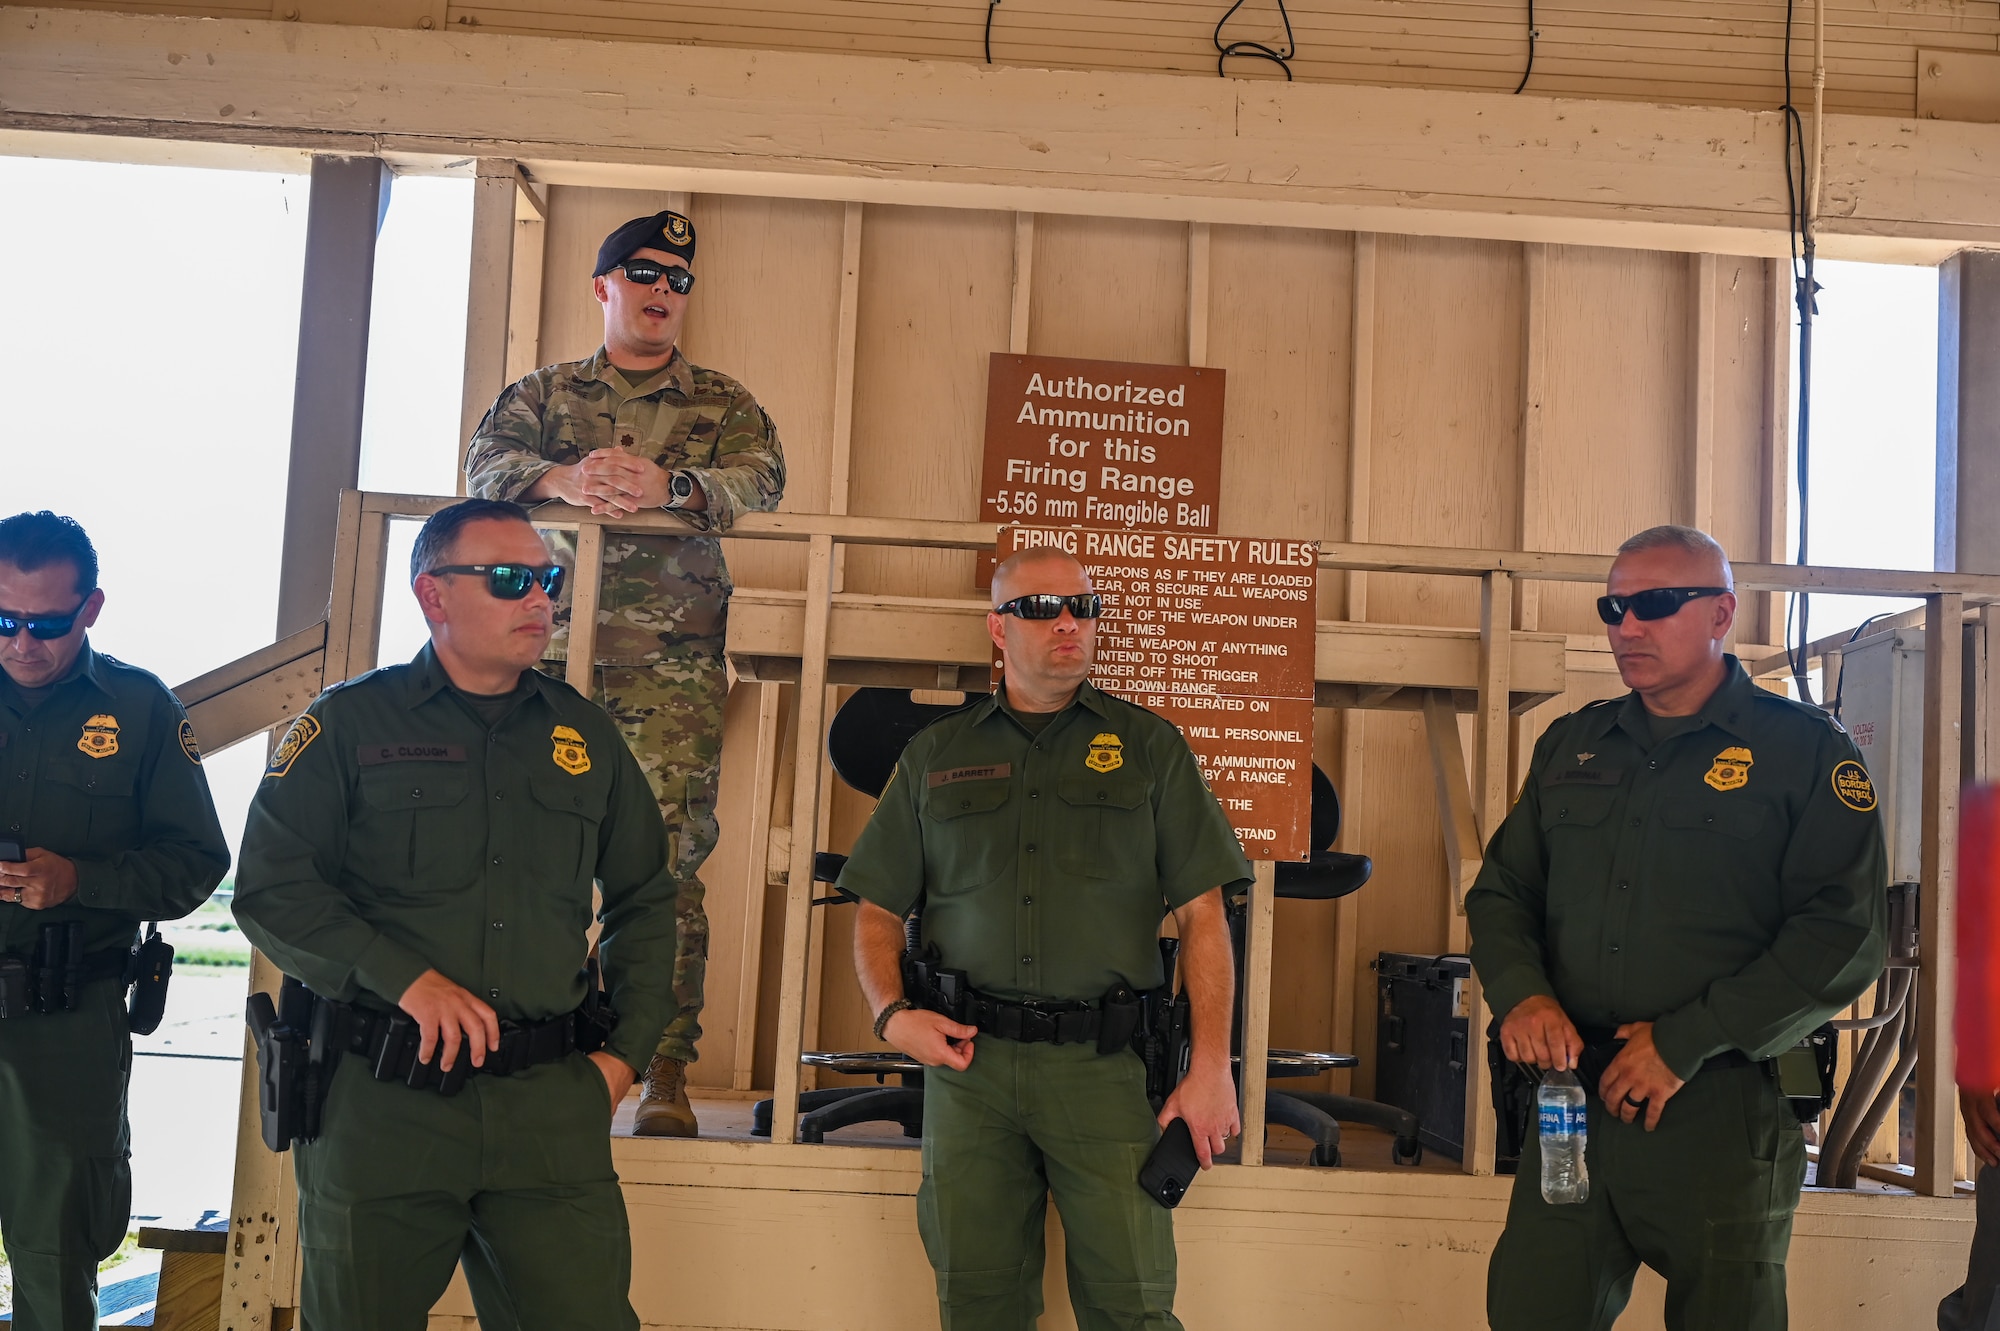 U.S. Air Force Maj. Robert Stone, 47th Security Forces Squadron commander (top left), speaks to tour participants about the capabilities of the Combat Arms Training and Maintenance (CATM) range during a base tour with the U.S. Border Patrol Del Rio Sector leadership and the Val Verde County Sheriff's Department at Laughlin Air Force Base, Texas, Aug. 4, 2023. The 47th SFS Defenders showcased various safety and security capabilities during the visit. (U.S. Air Force photo by Airman 1st Class Keira Rossman)